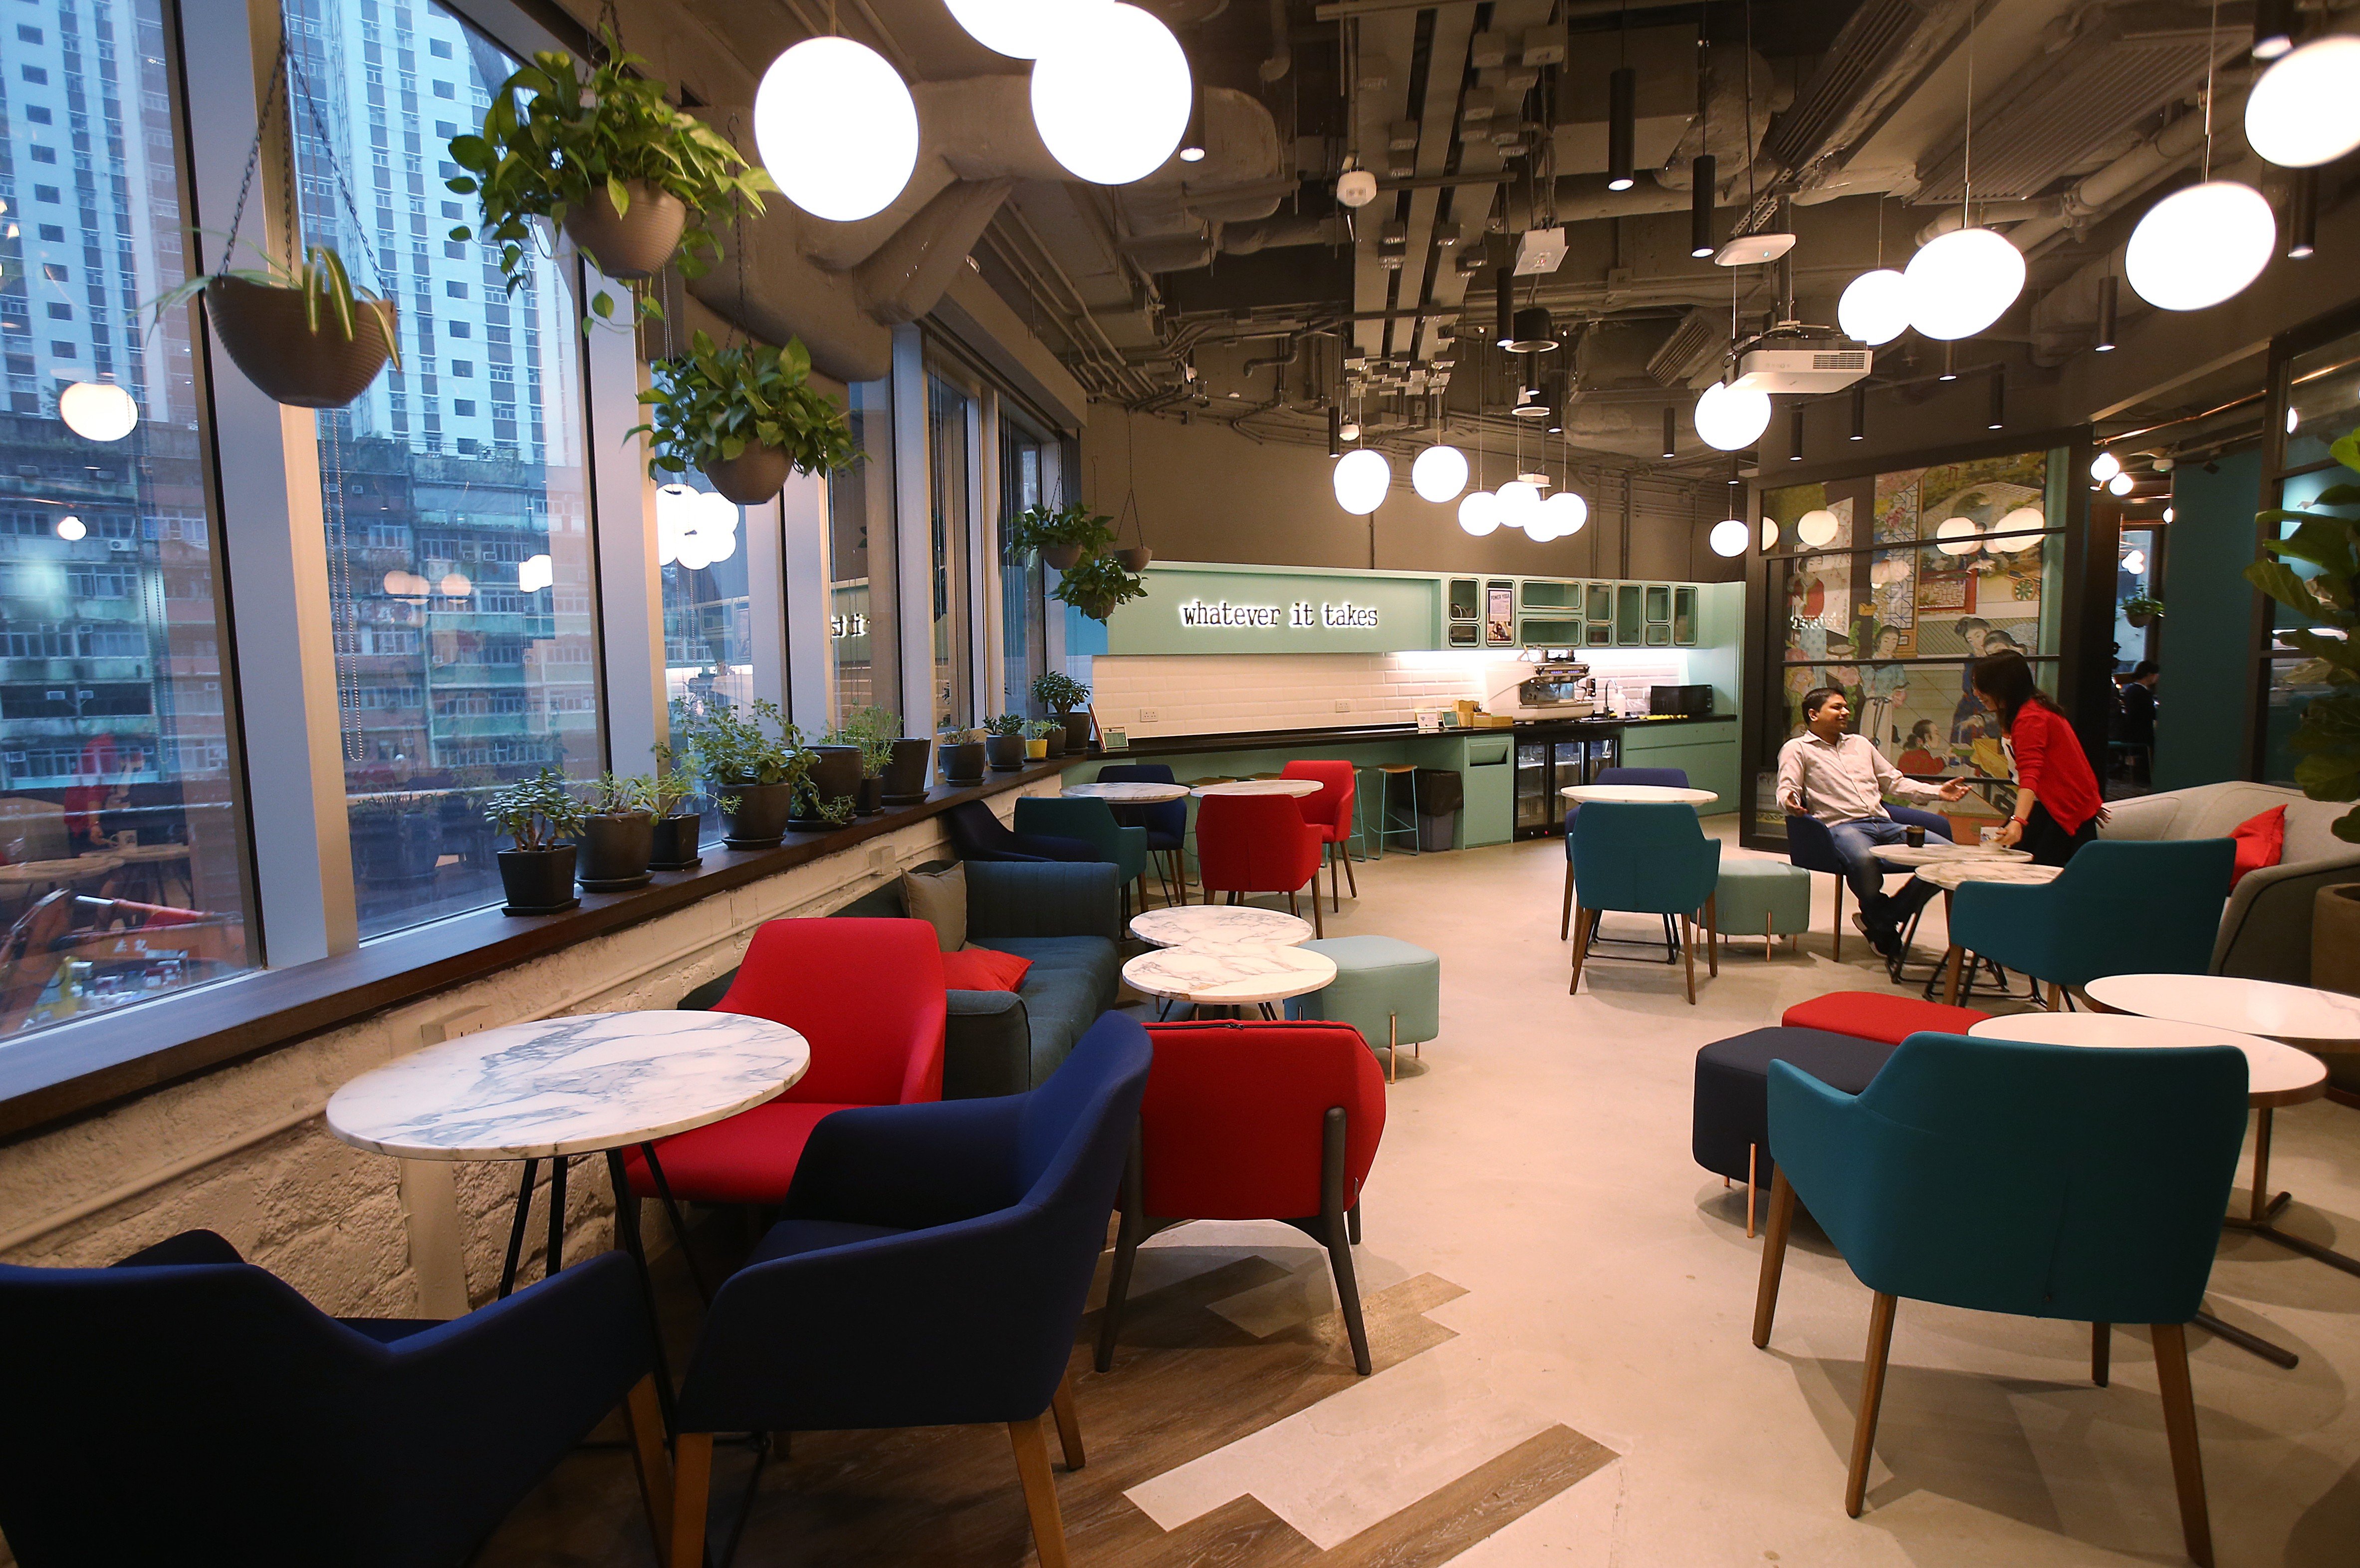 Multinational companies are beginning to discover the appeal of co-working spaces as a flexible office solution